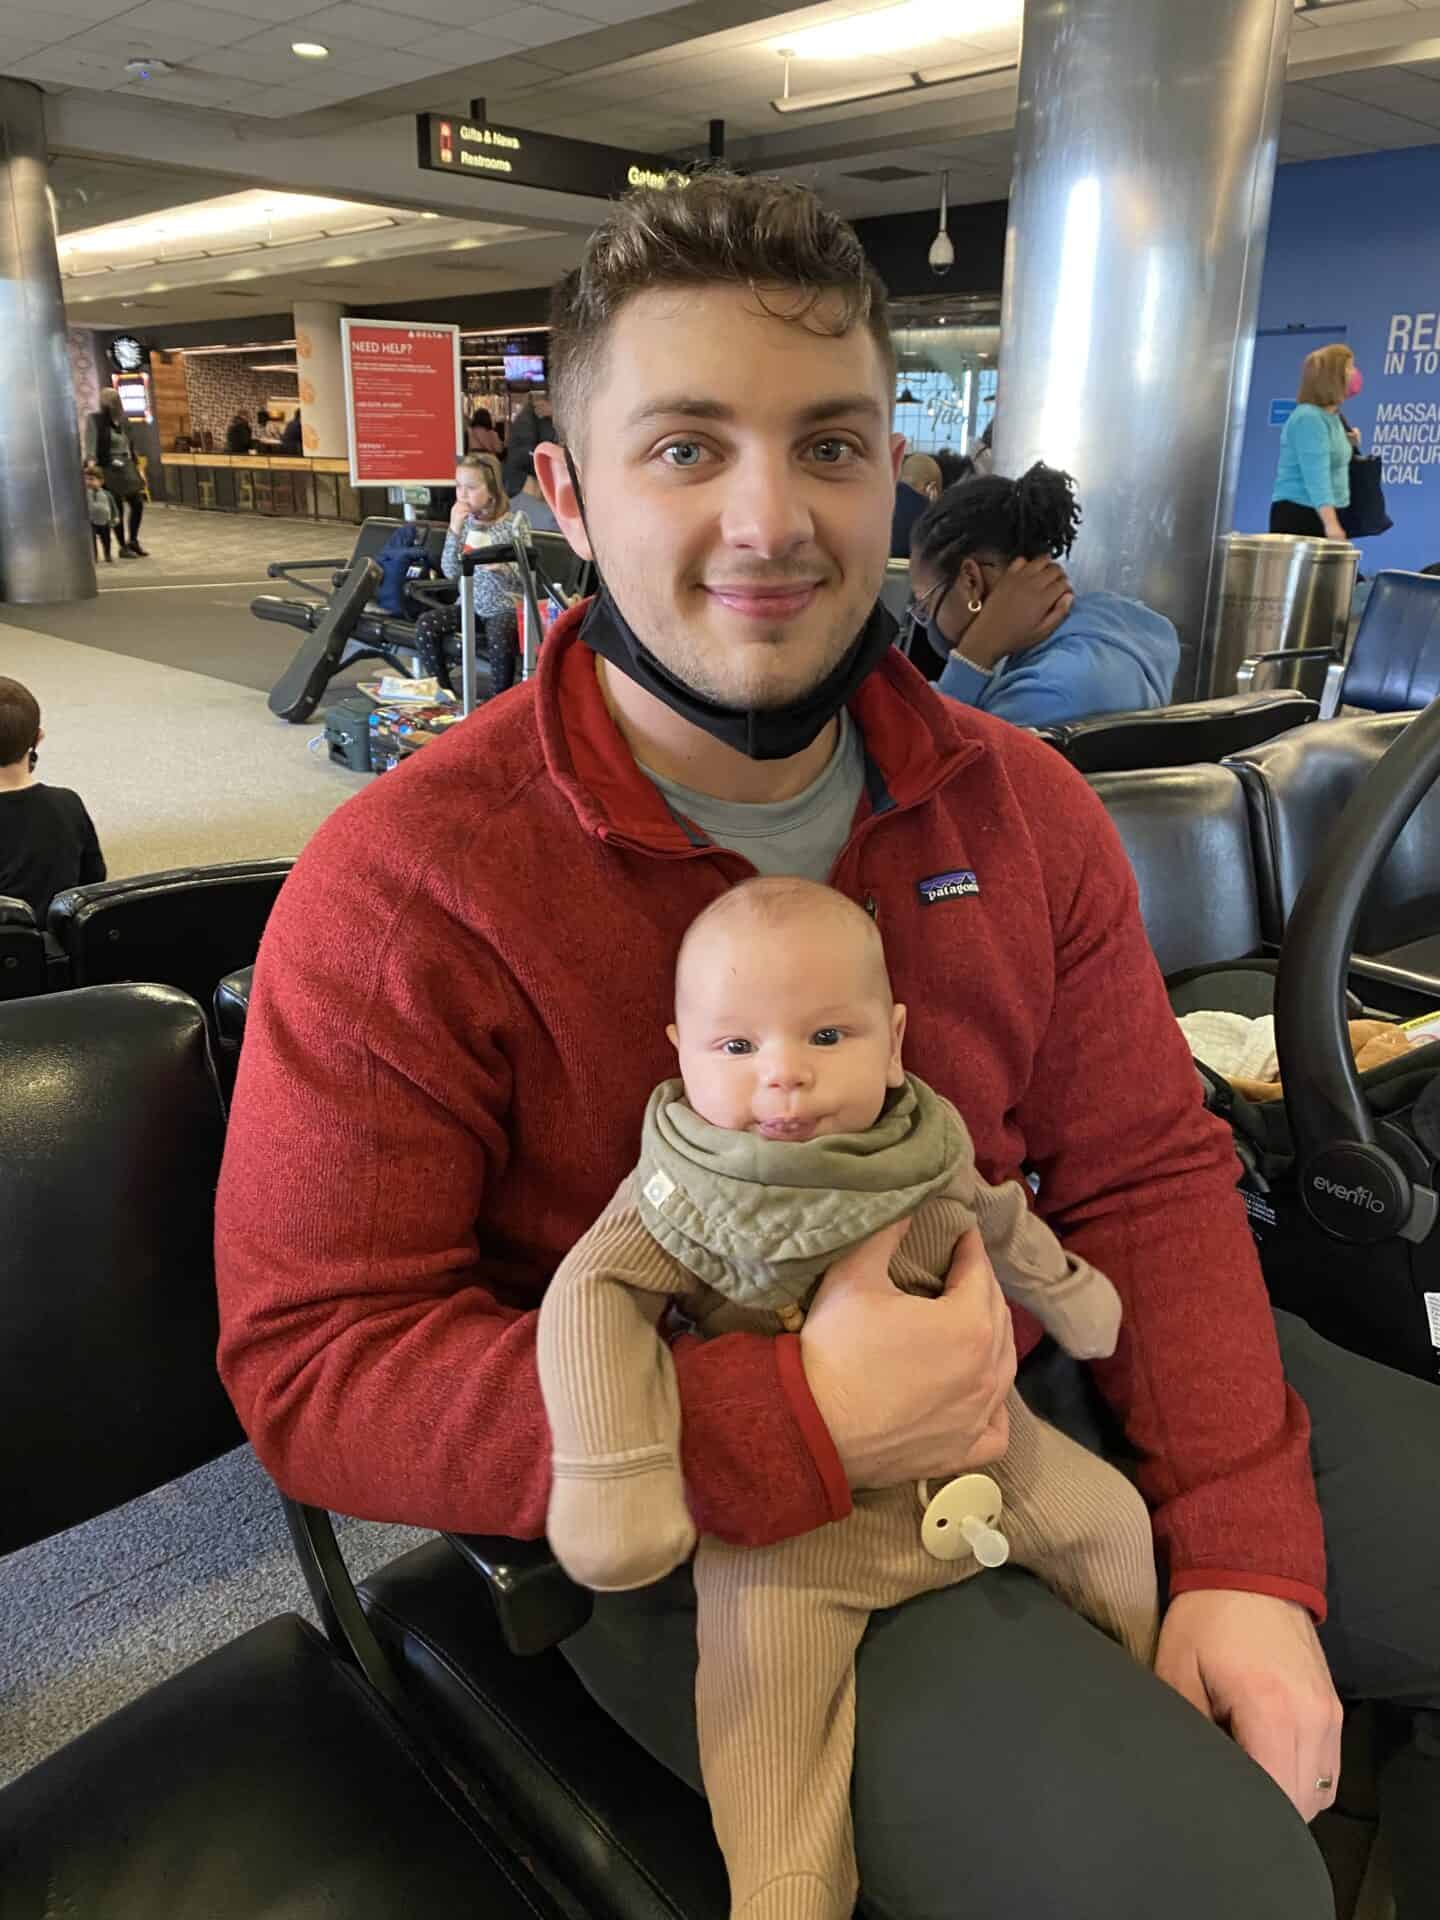 father in red sweatshirt holding two month old baby on his lap in an airport